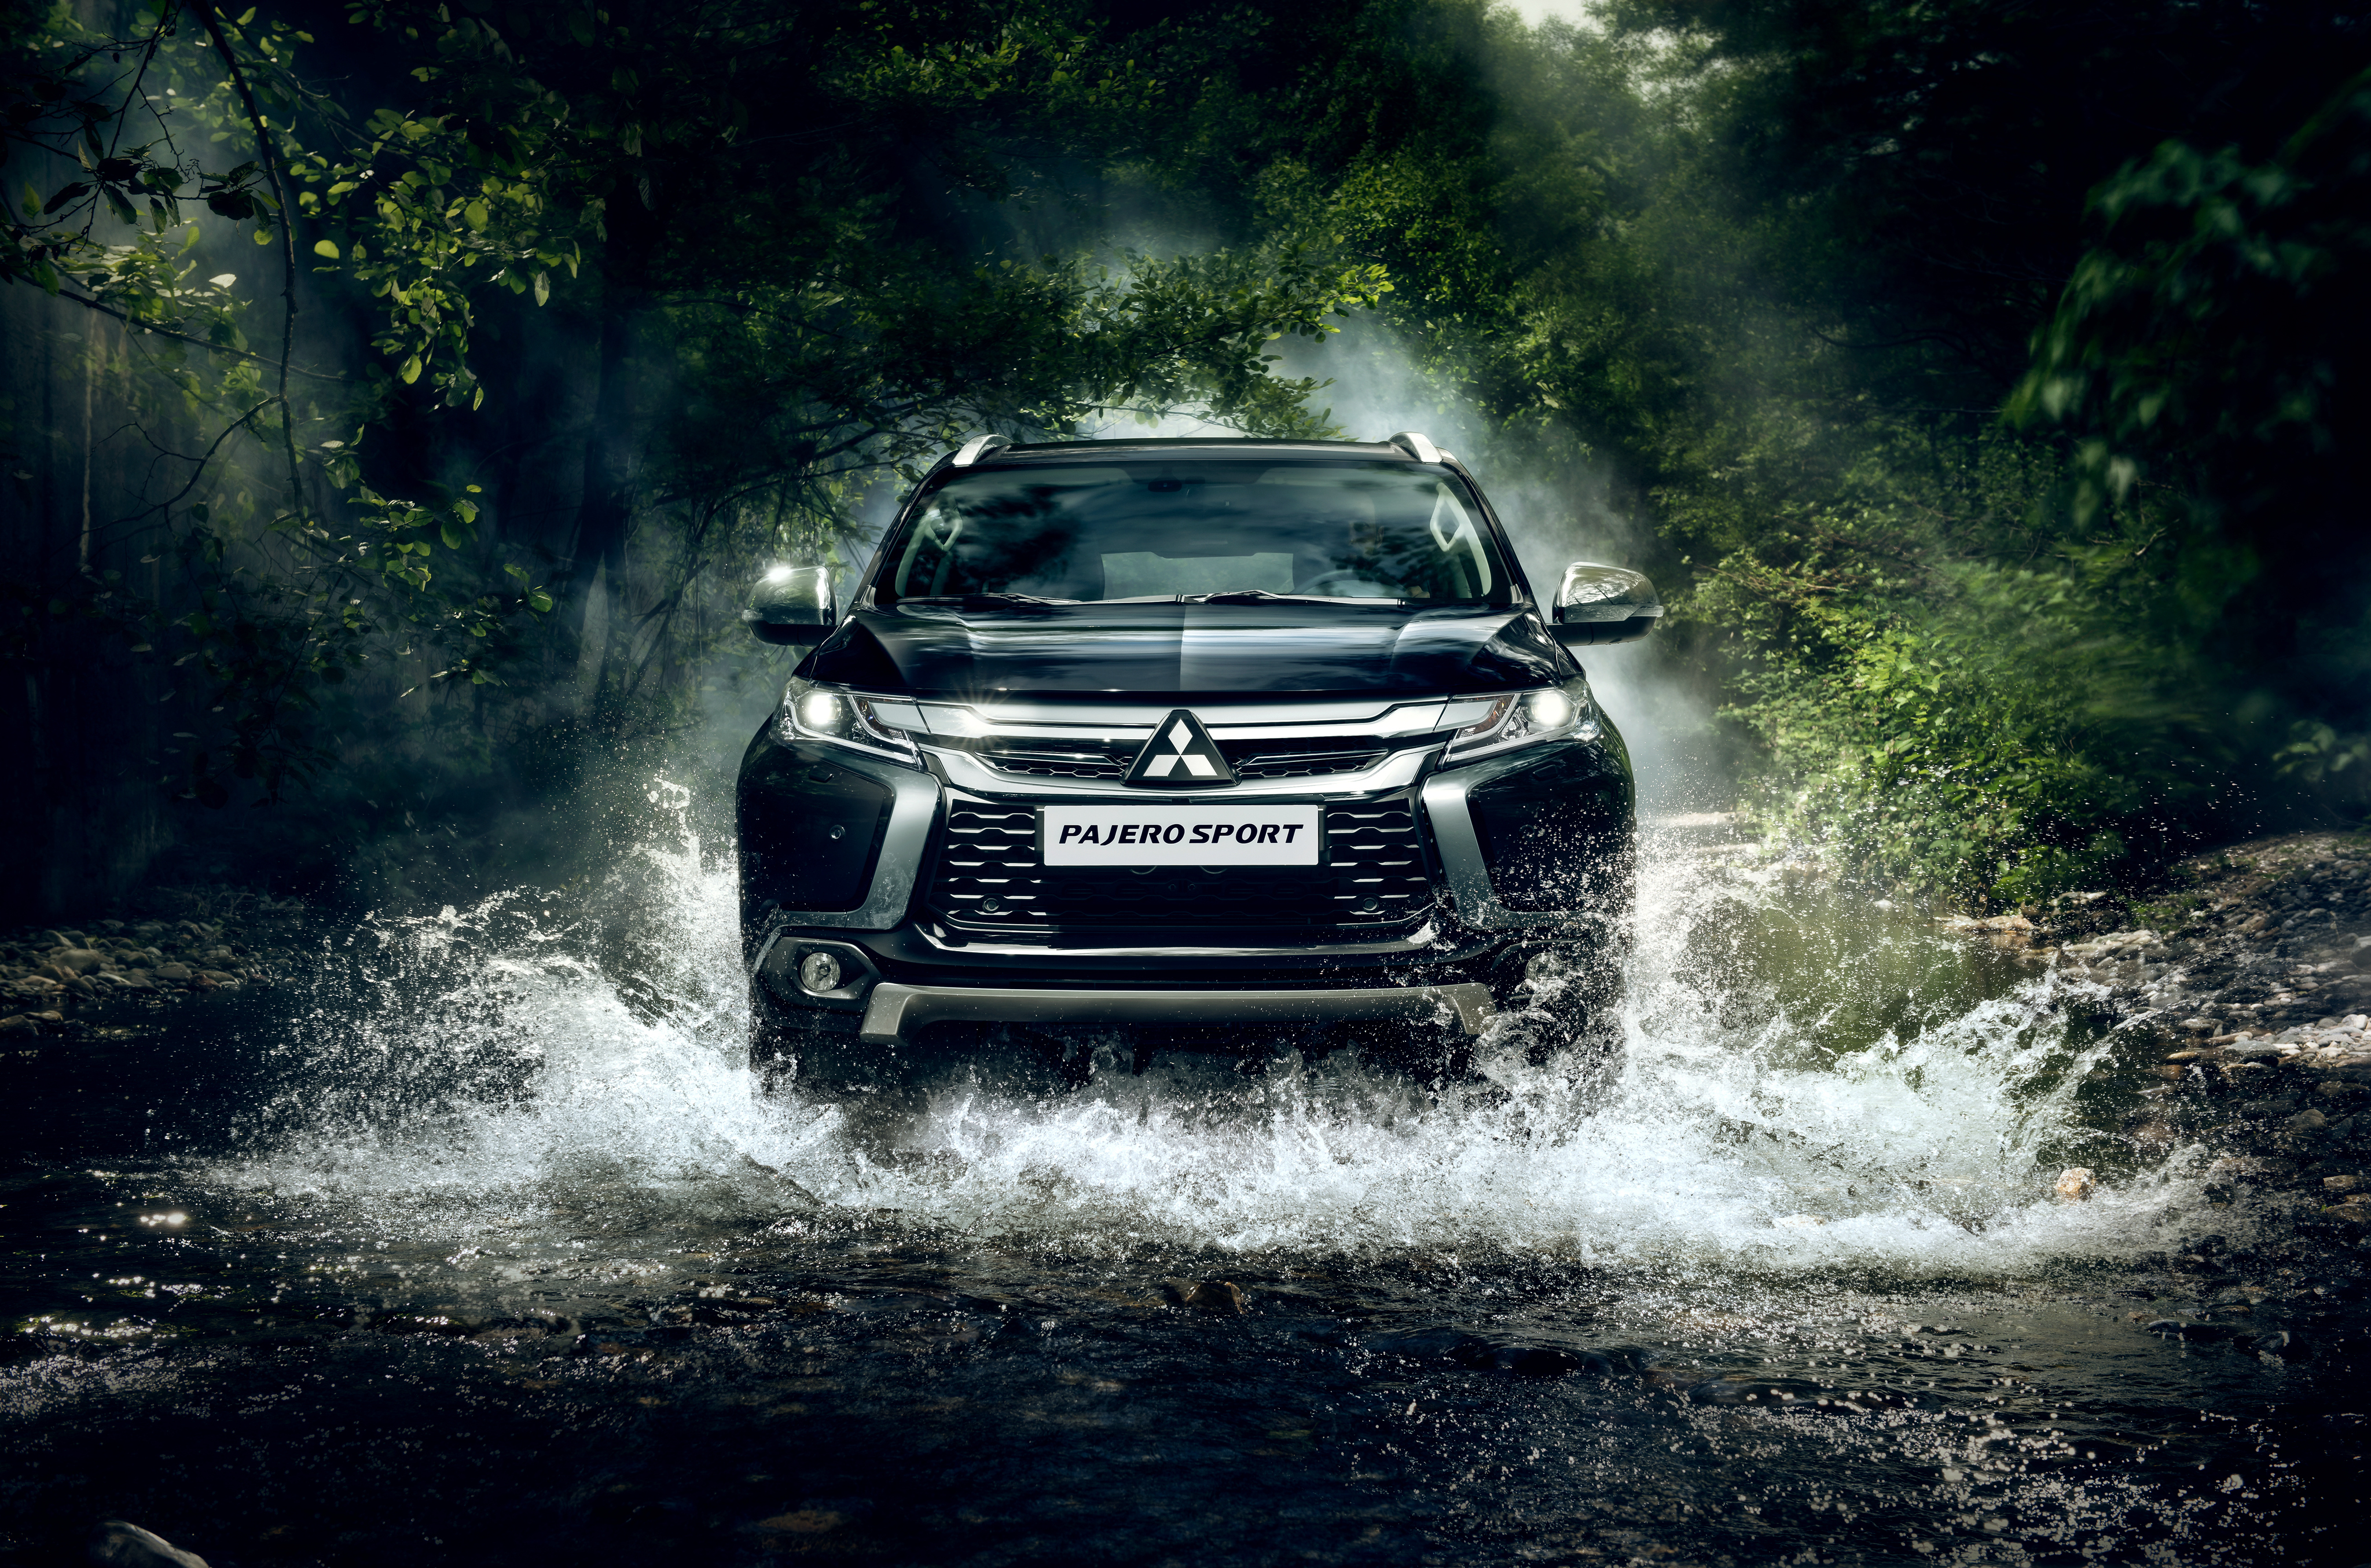 pajero, mitsubishi, front view, cars, rivers lock screen backgrounds